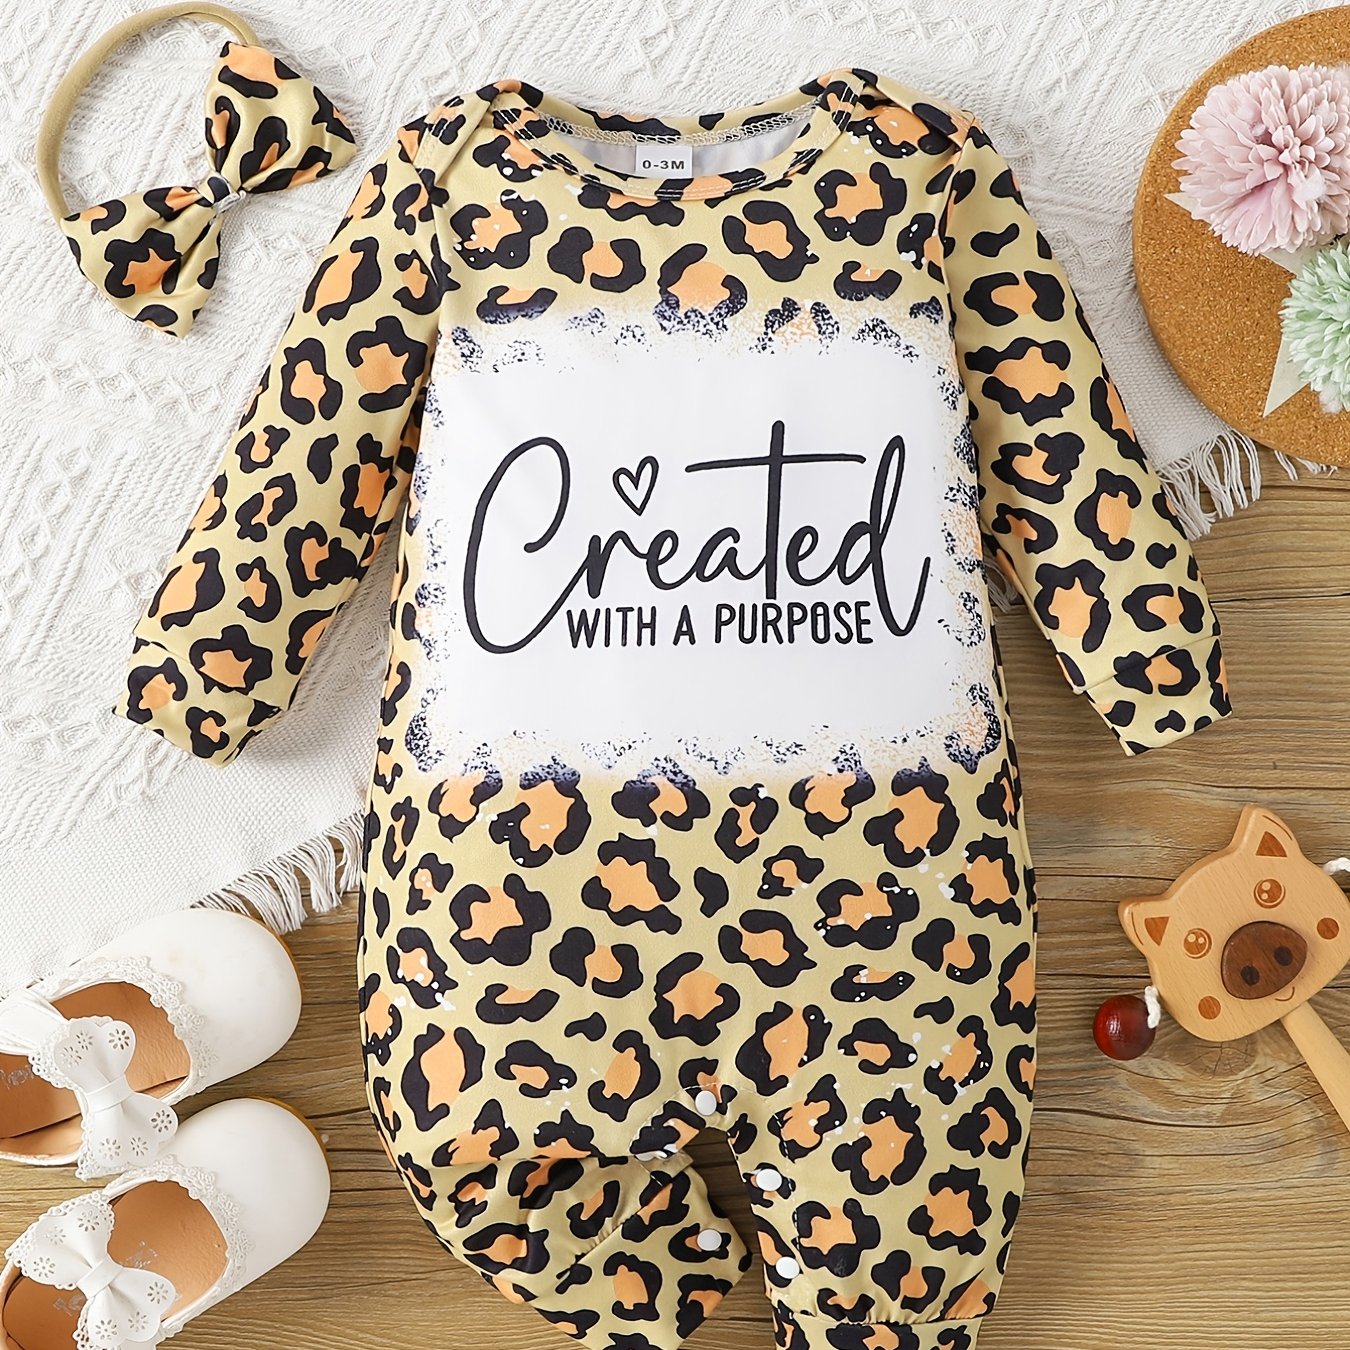 Created With A Purpose Long Sleeve Christian Baby Onesie claimedbygoddesigns